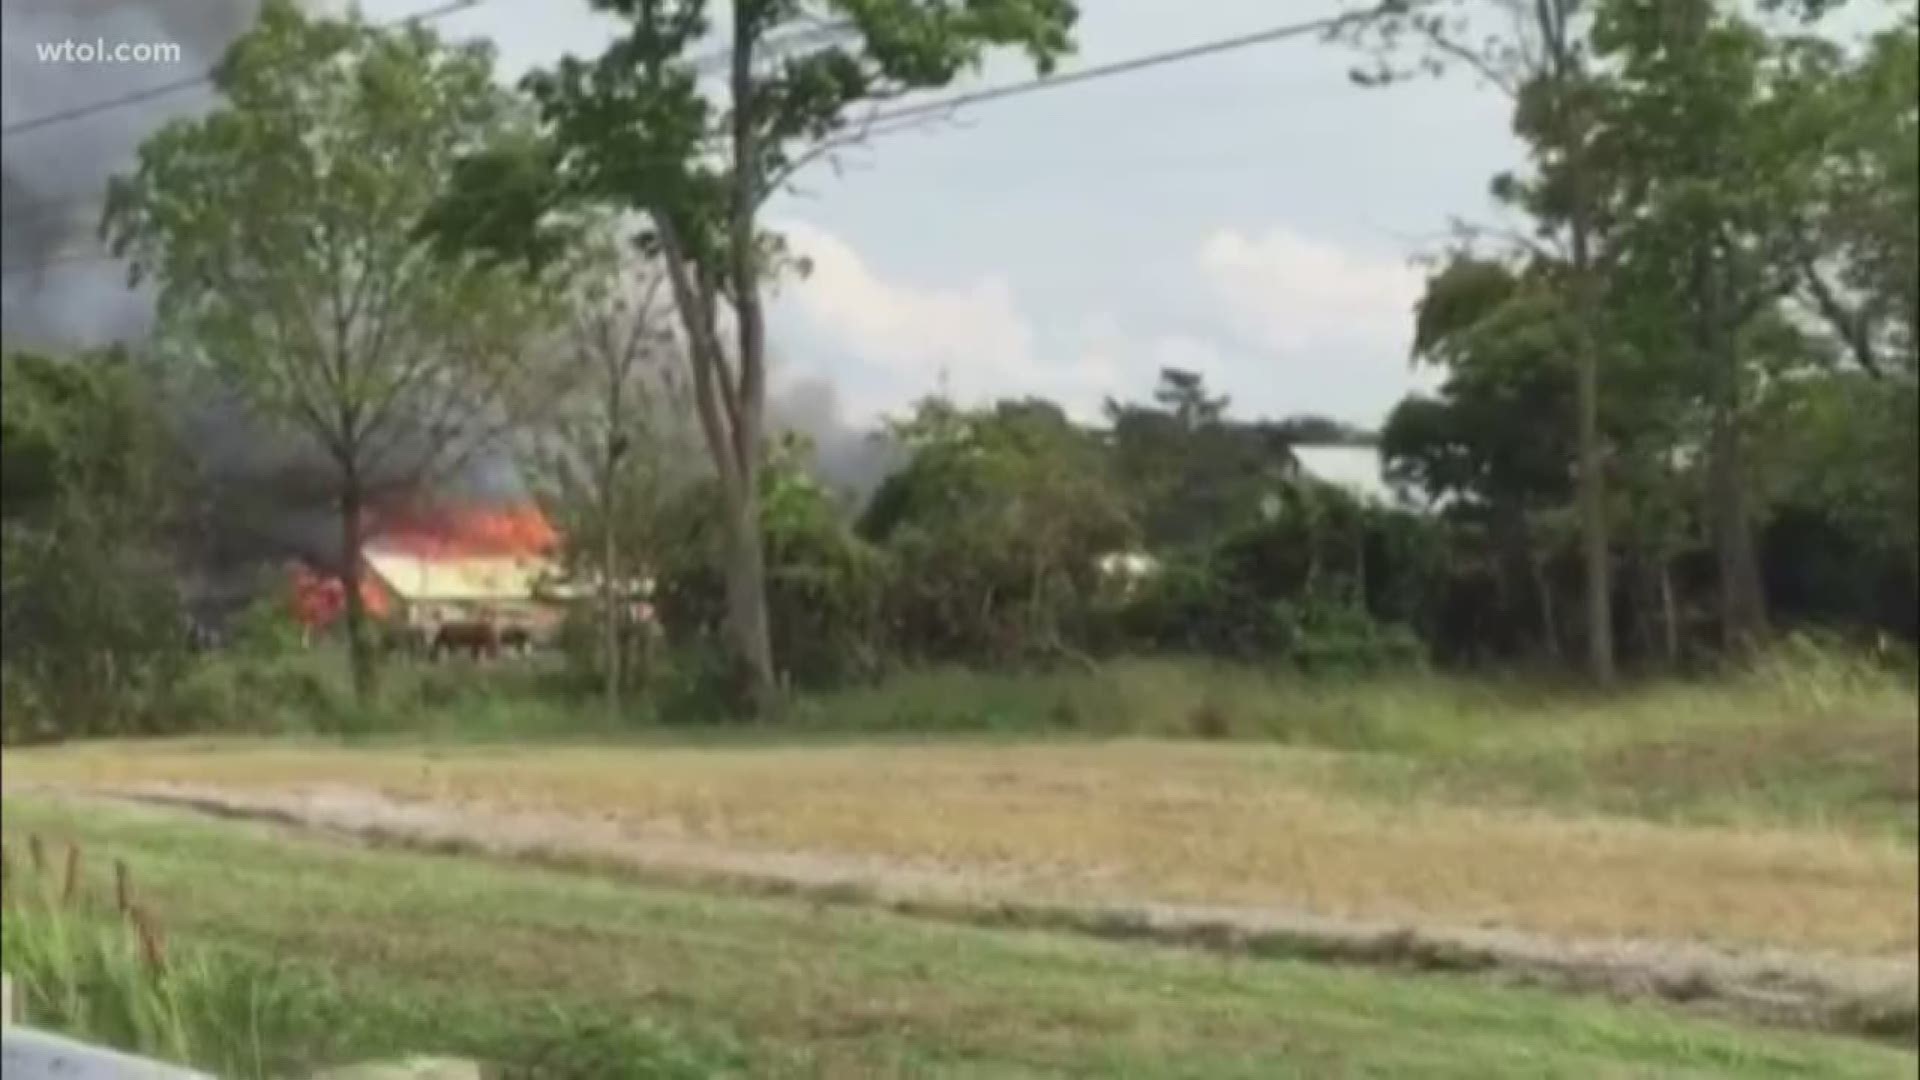 No humans were injured in the blaze at Fantasy Acres near Perrysburg.